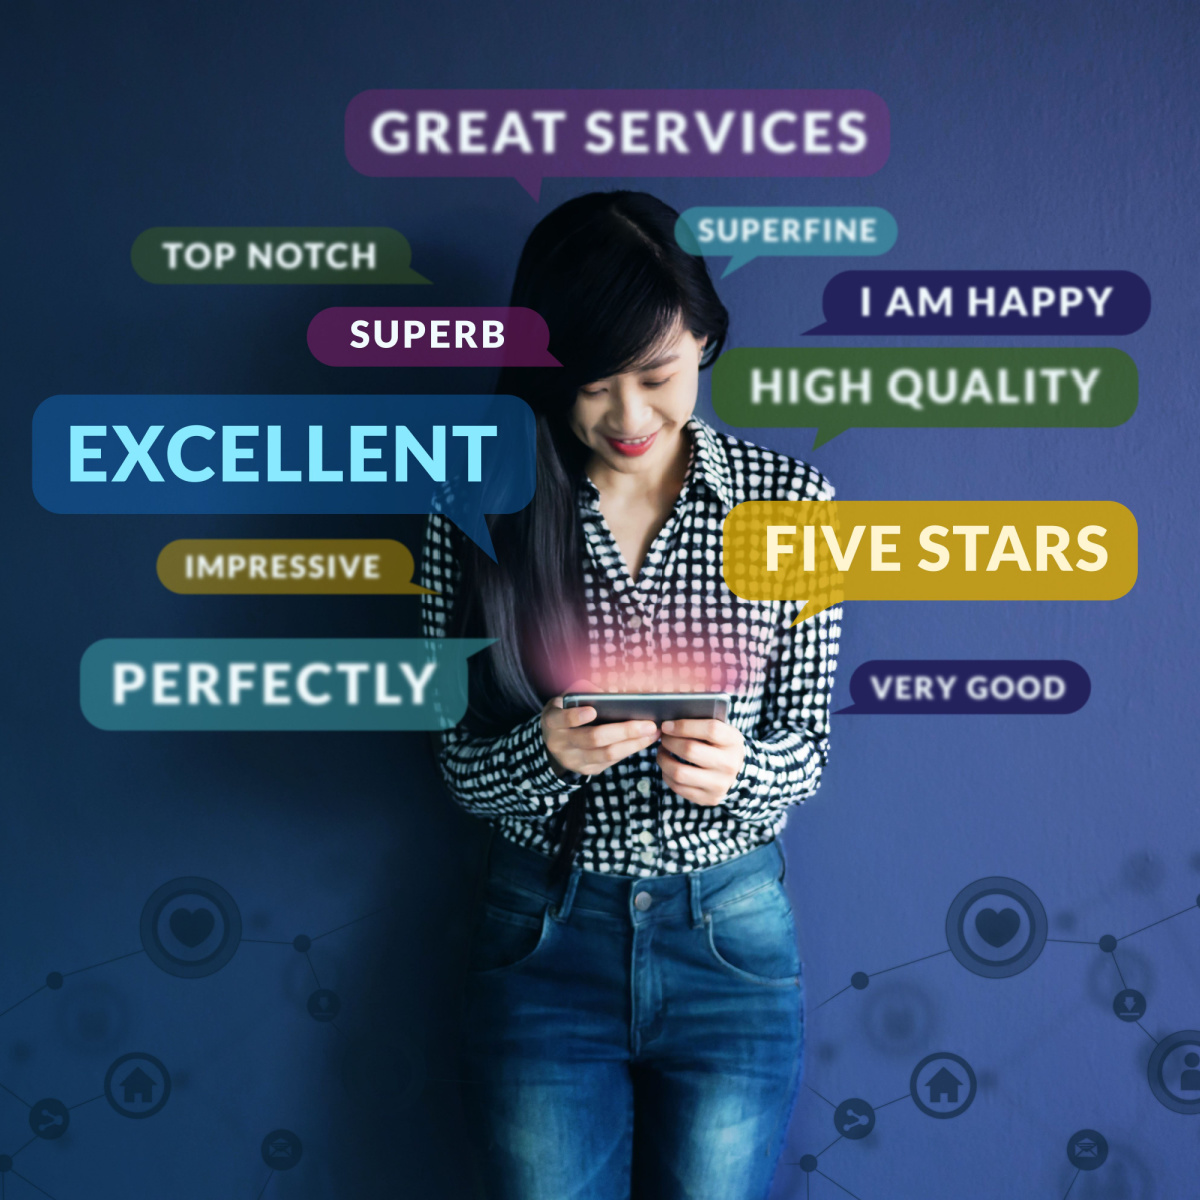 A satisfied customer leaves a glowing review that can be used for digital marketing.